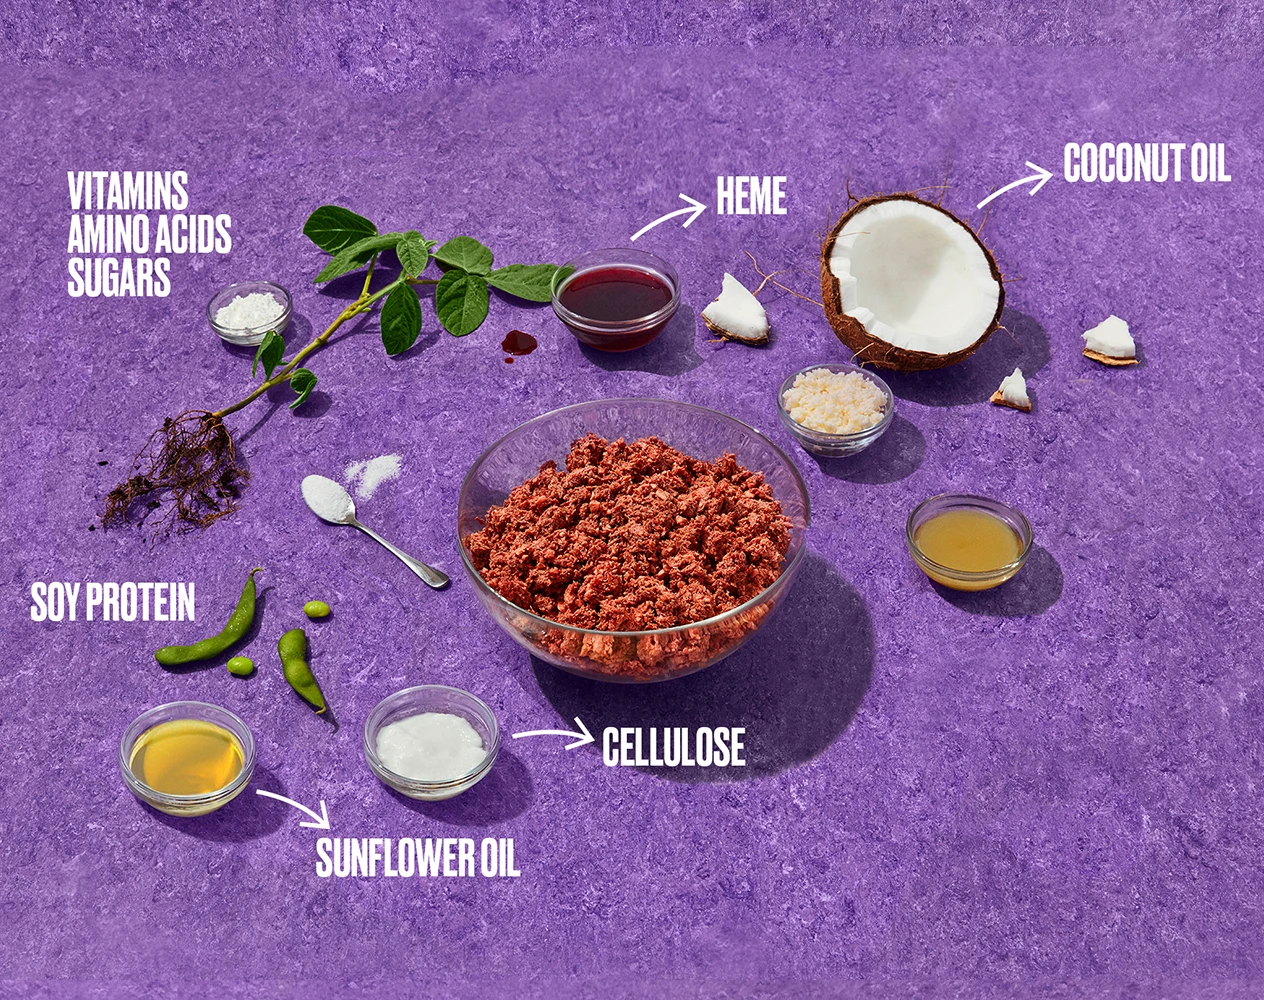 Image of Impossible Beef ingredients including soy protein, heme, coconut oil, sunflower oil, vitamins and cellulose